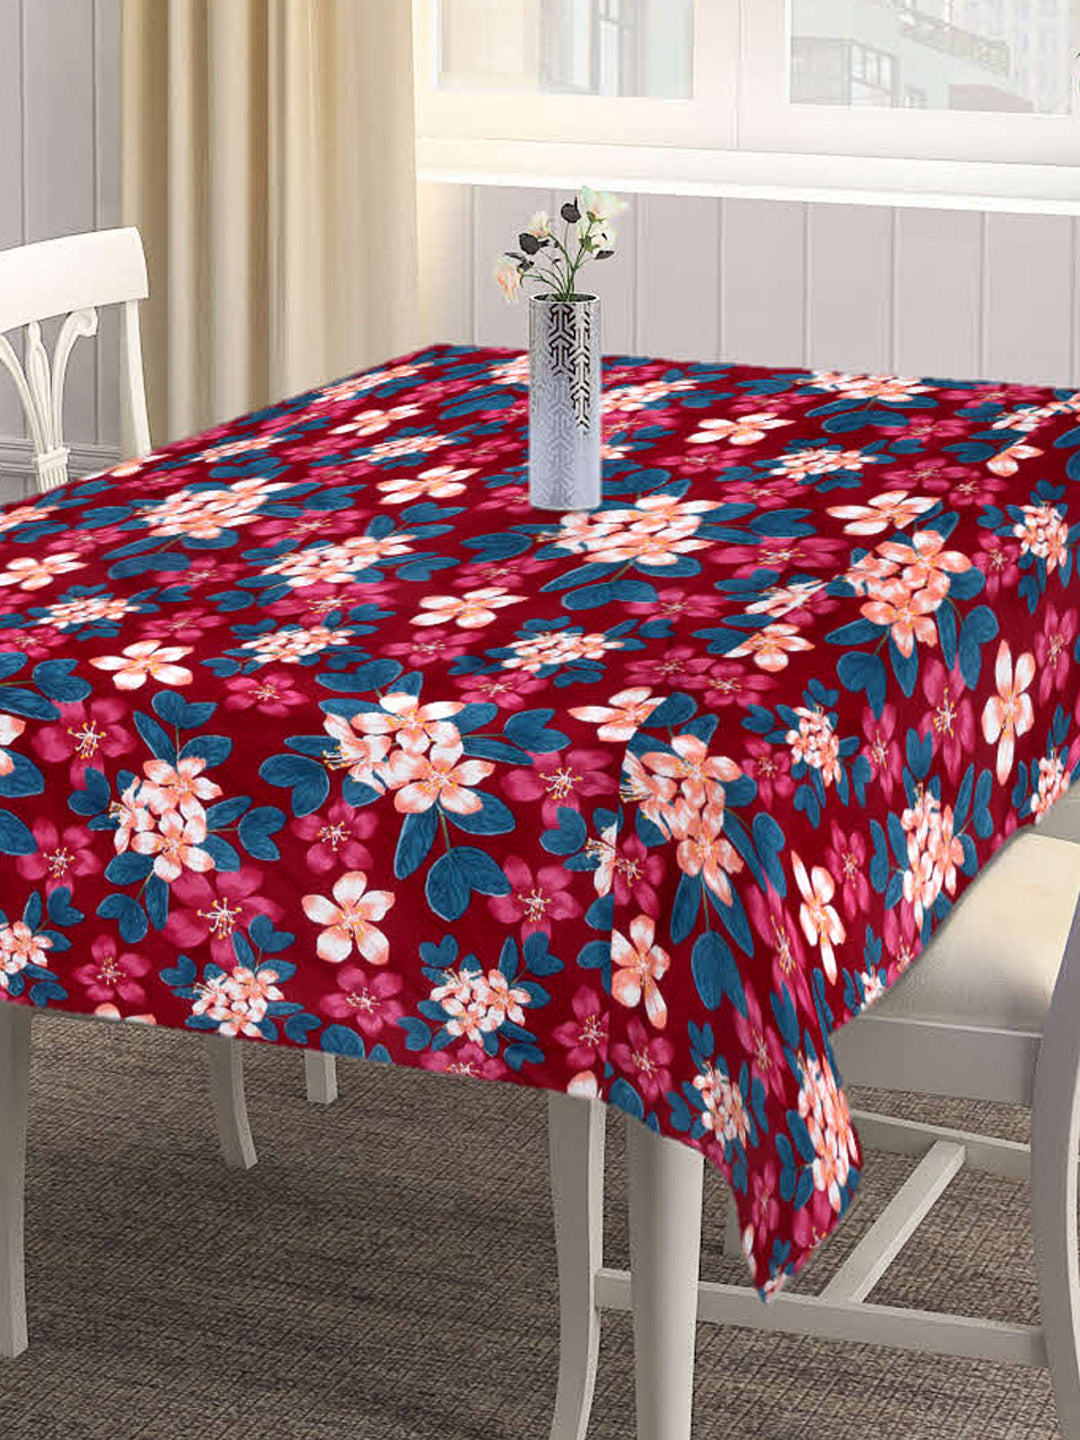 Arrabi Red Floral Cotton Blend 8 SEATER Table Cover (225 X 150 cm)